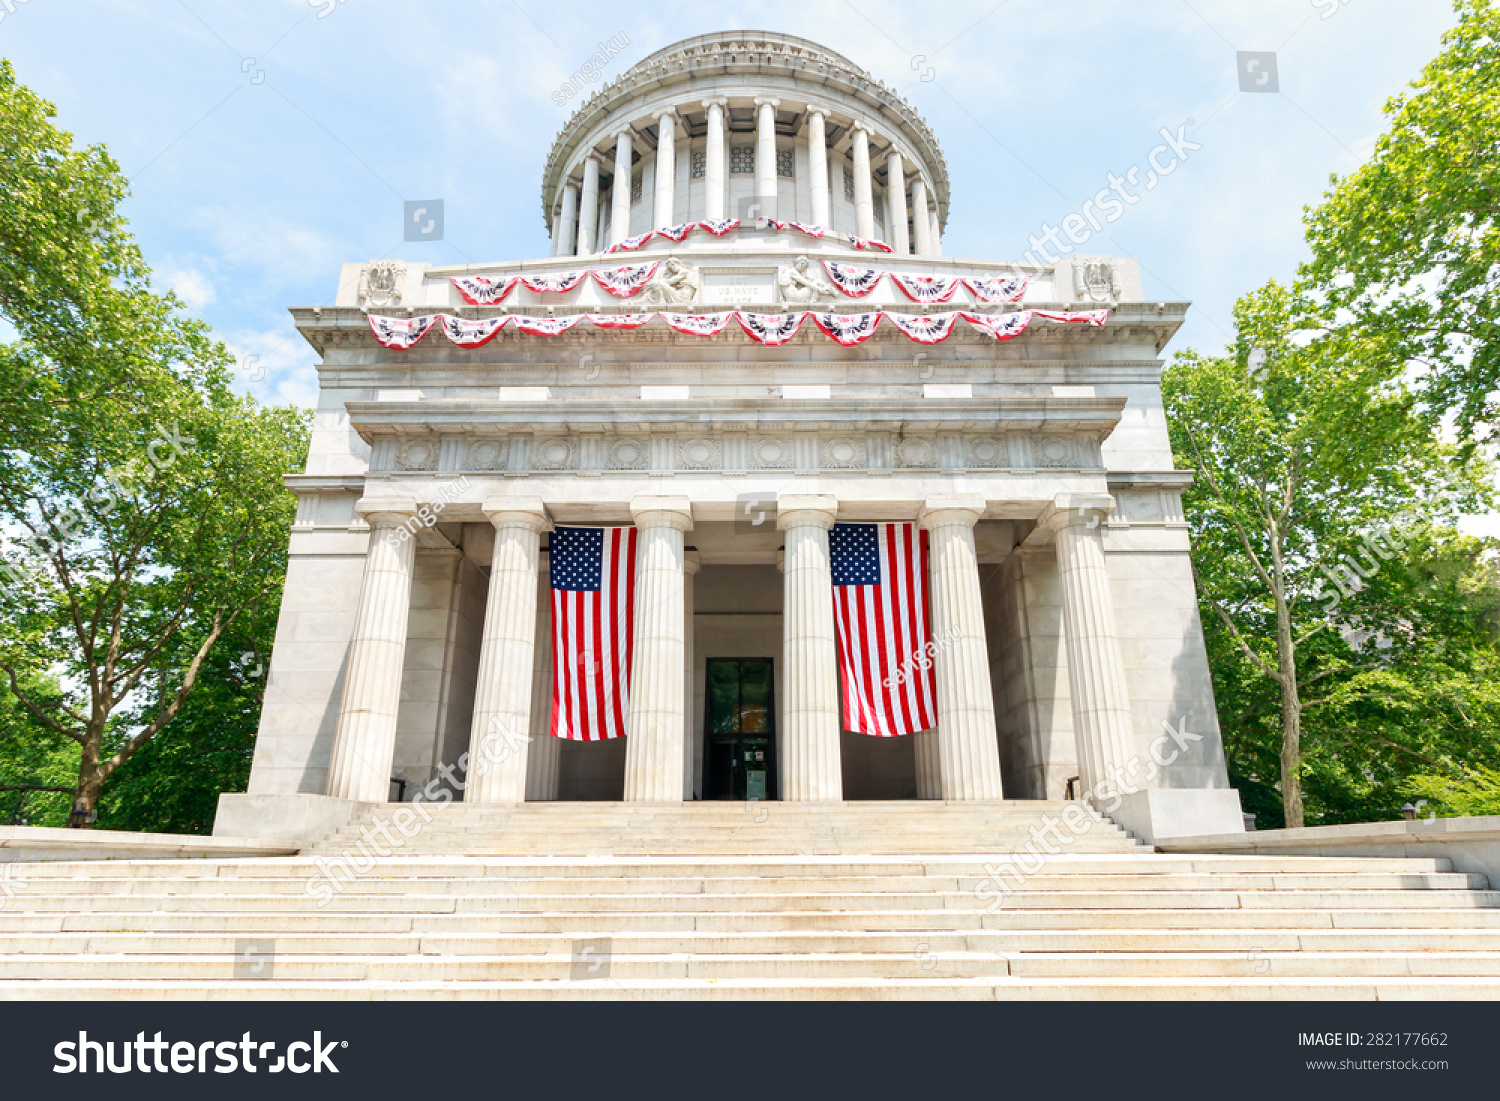 Grant's Tomb with Flags - New York City  #282177662